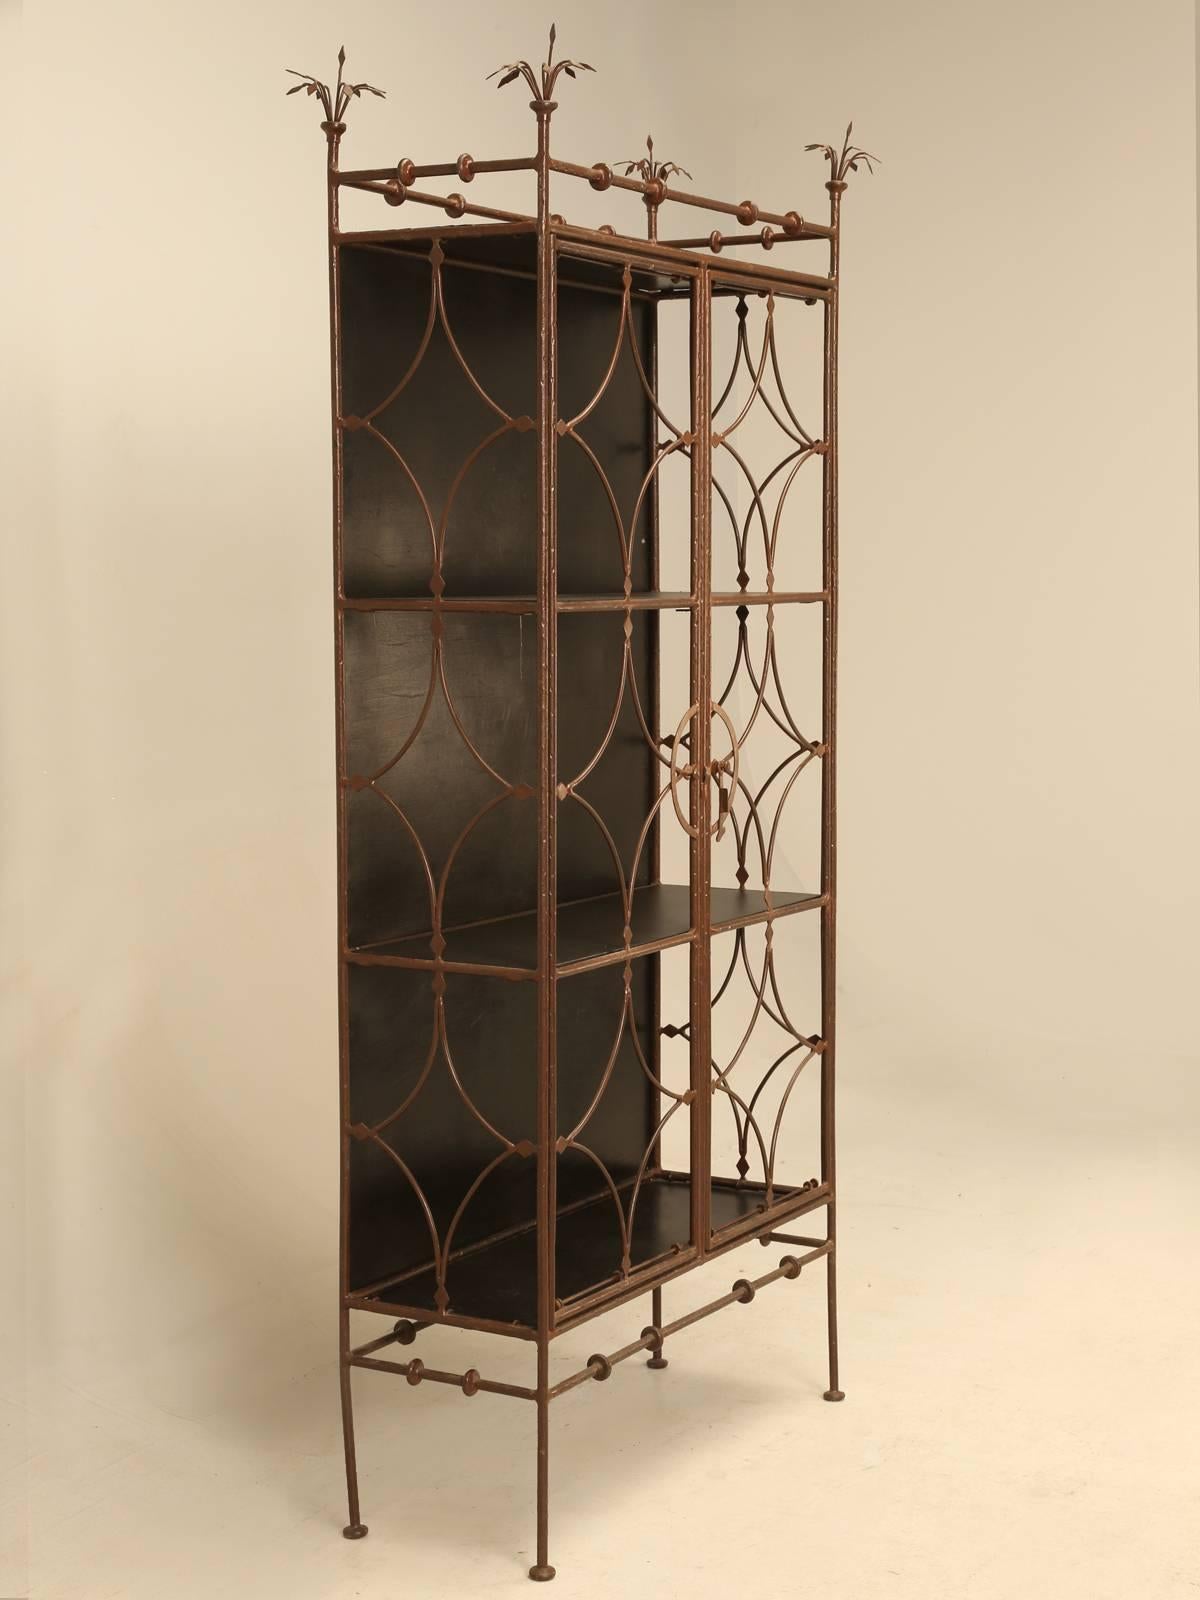 Very unusual metal bibliotheque (bookcase) or display piece. We purchased this in the town of Vannes, which is a medieval walled city in the Brittany region of France and is over 2000 years old. The antique dealer we purchased this from, stated that